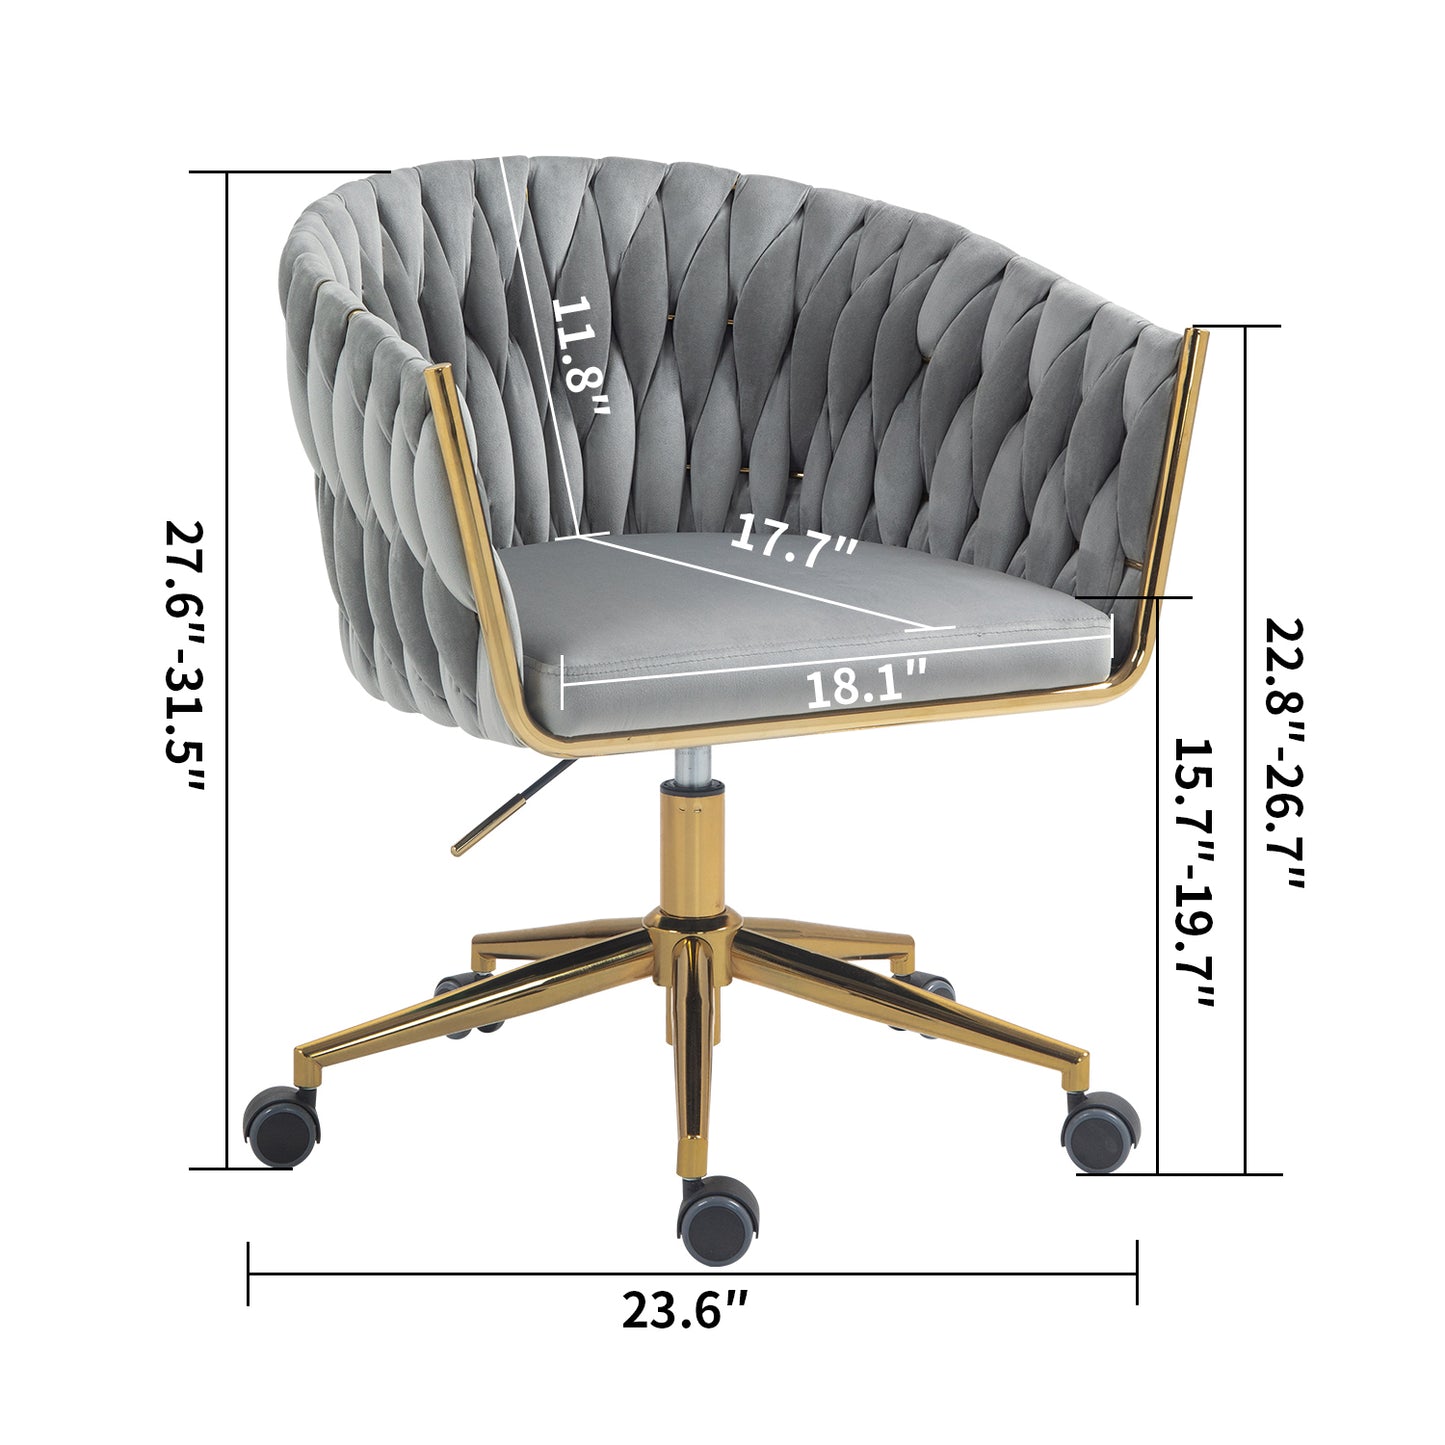 Moderna Hand-woven Office chair in Grey Fabric